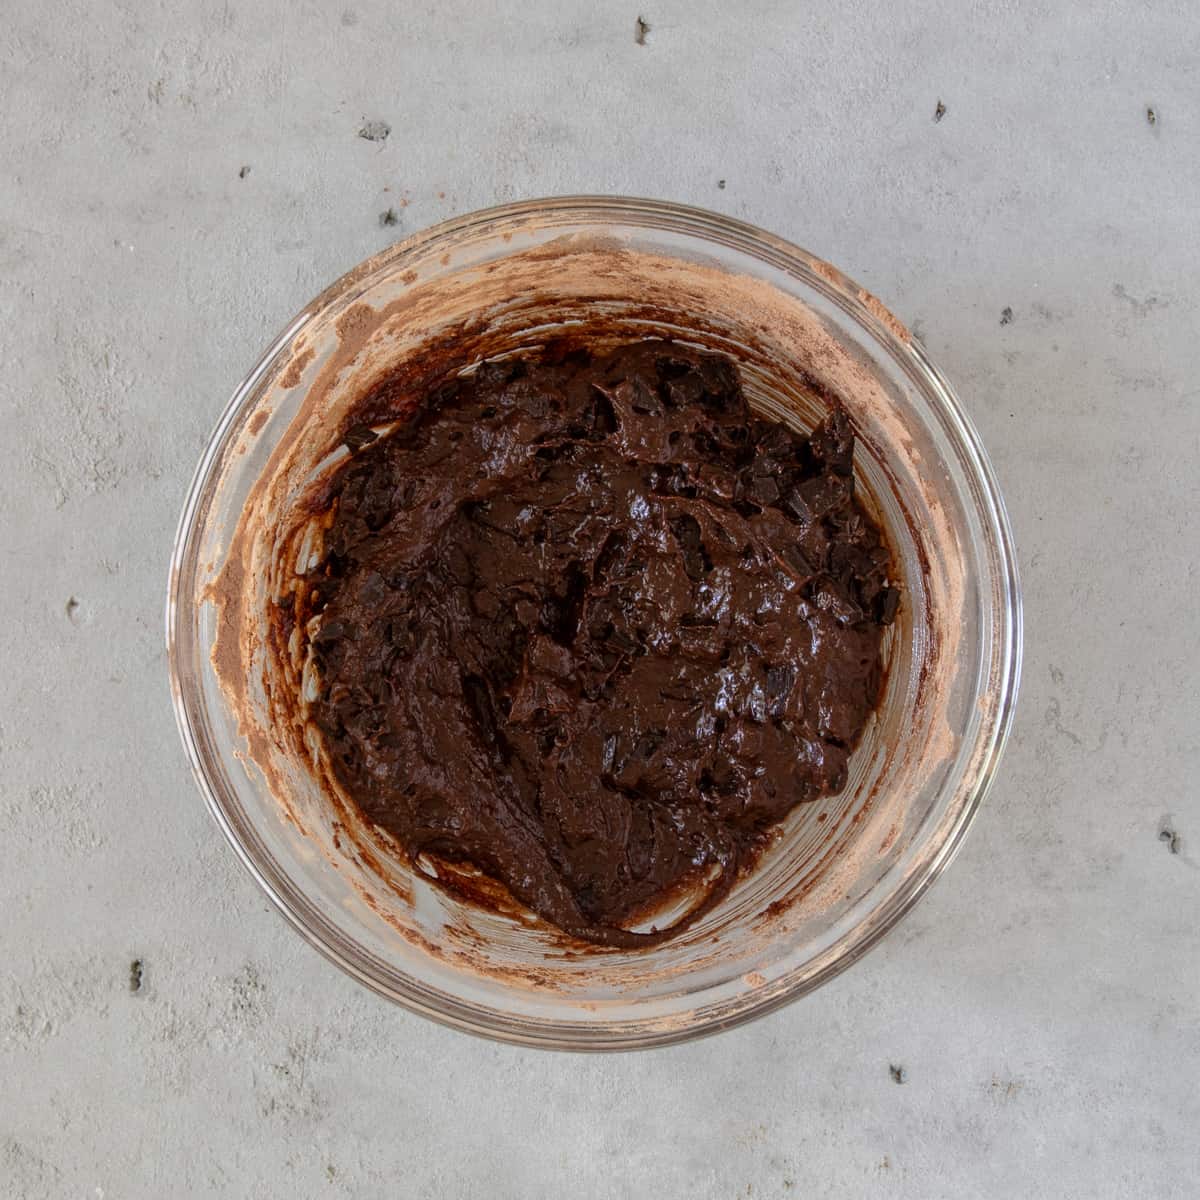 the completed brownie batter in a glass bowl on a grey background.